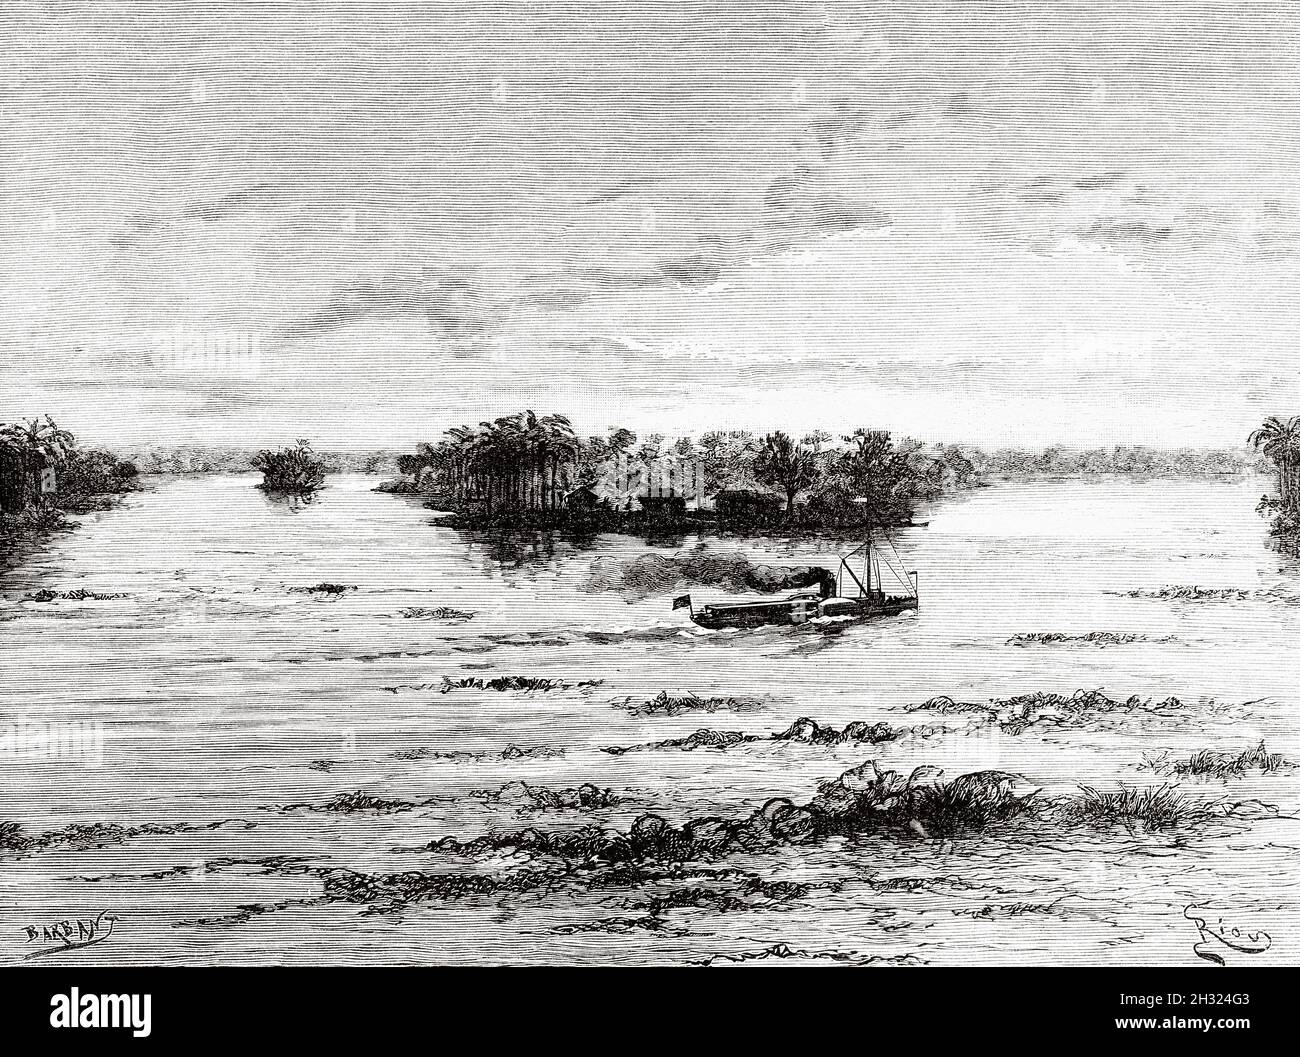 The Paraguay river in front of Formosa. Paraguay, South America. Old 19th century engraved illustration, Expedition to the Pilcomayo Delta by French explorer Emile Arthur Thouar from Le Tour du Monde 1889 Stock Photo